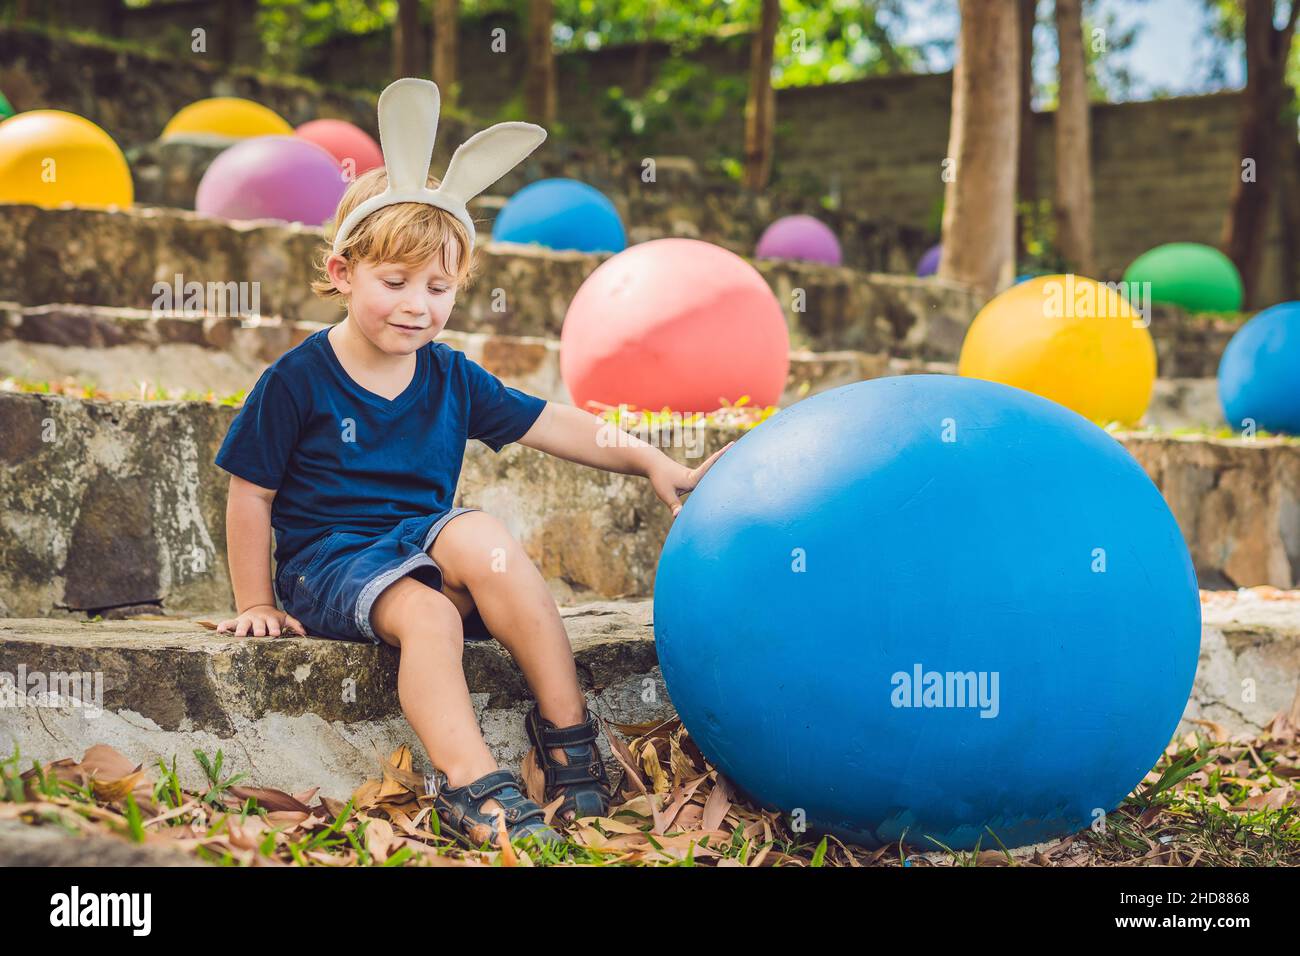 Cute little kid boy with bunny ears having fun with traditional Easter eggs hunt, outdoors. Celebrating Easter holiday. Toddler finding, colorful eggs Stock Photo